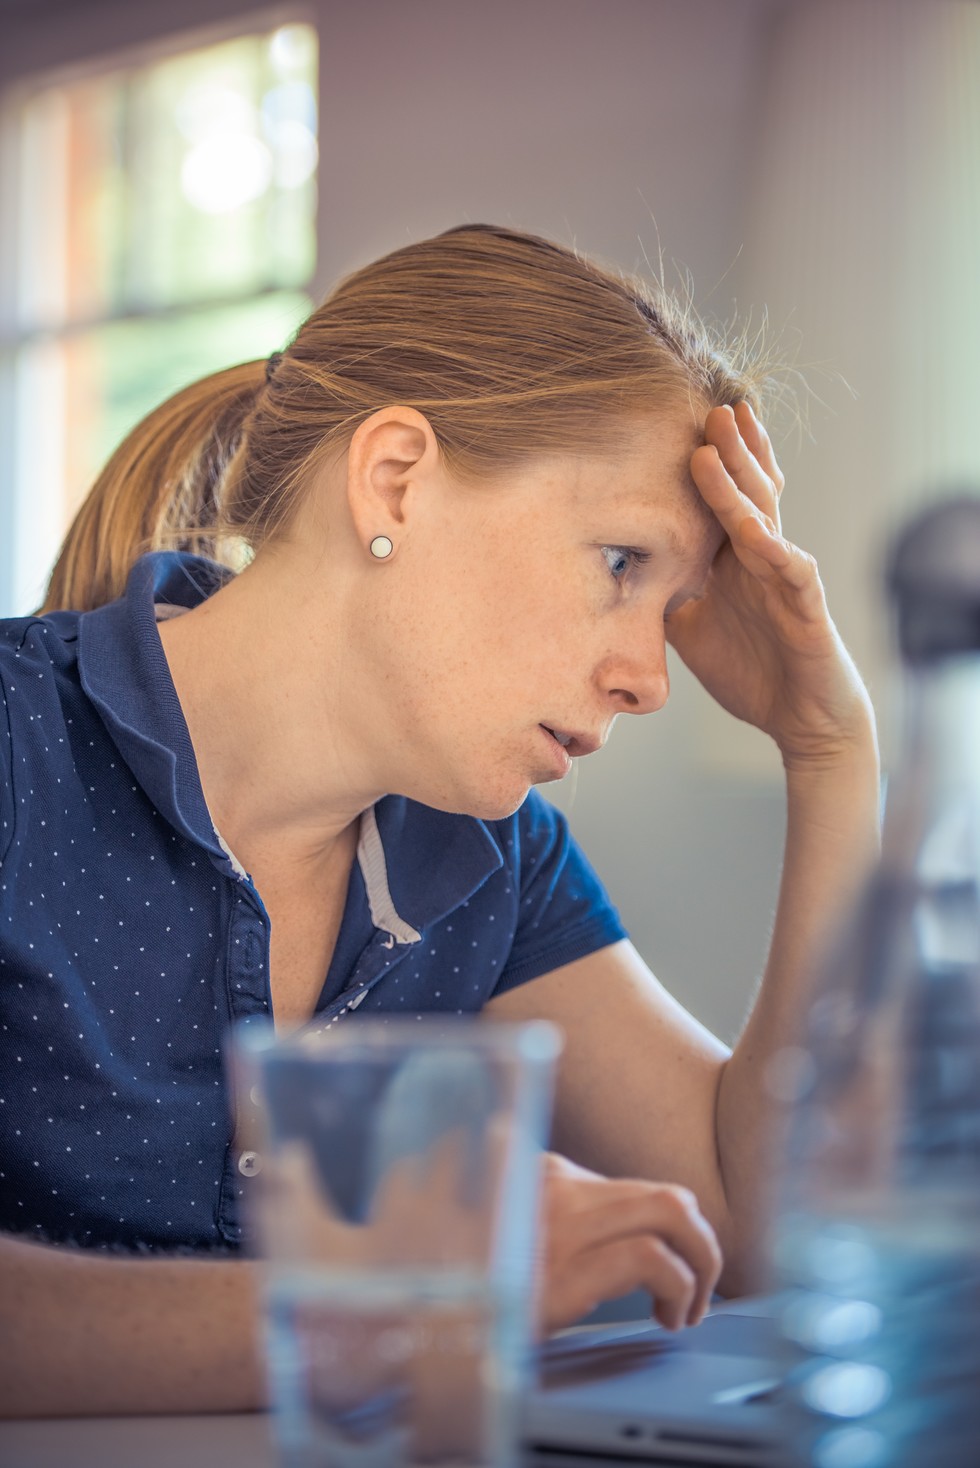 A woman stressed while on the computer